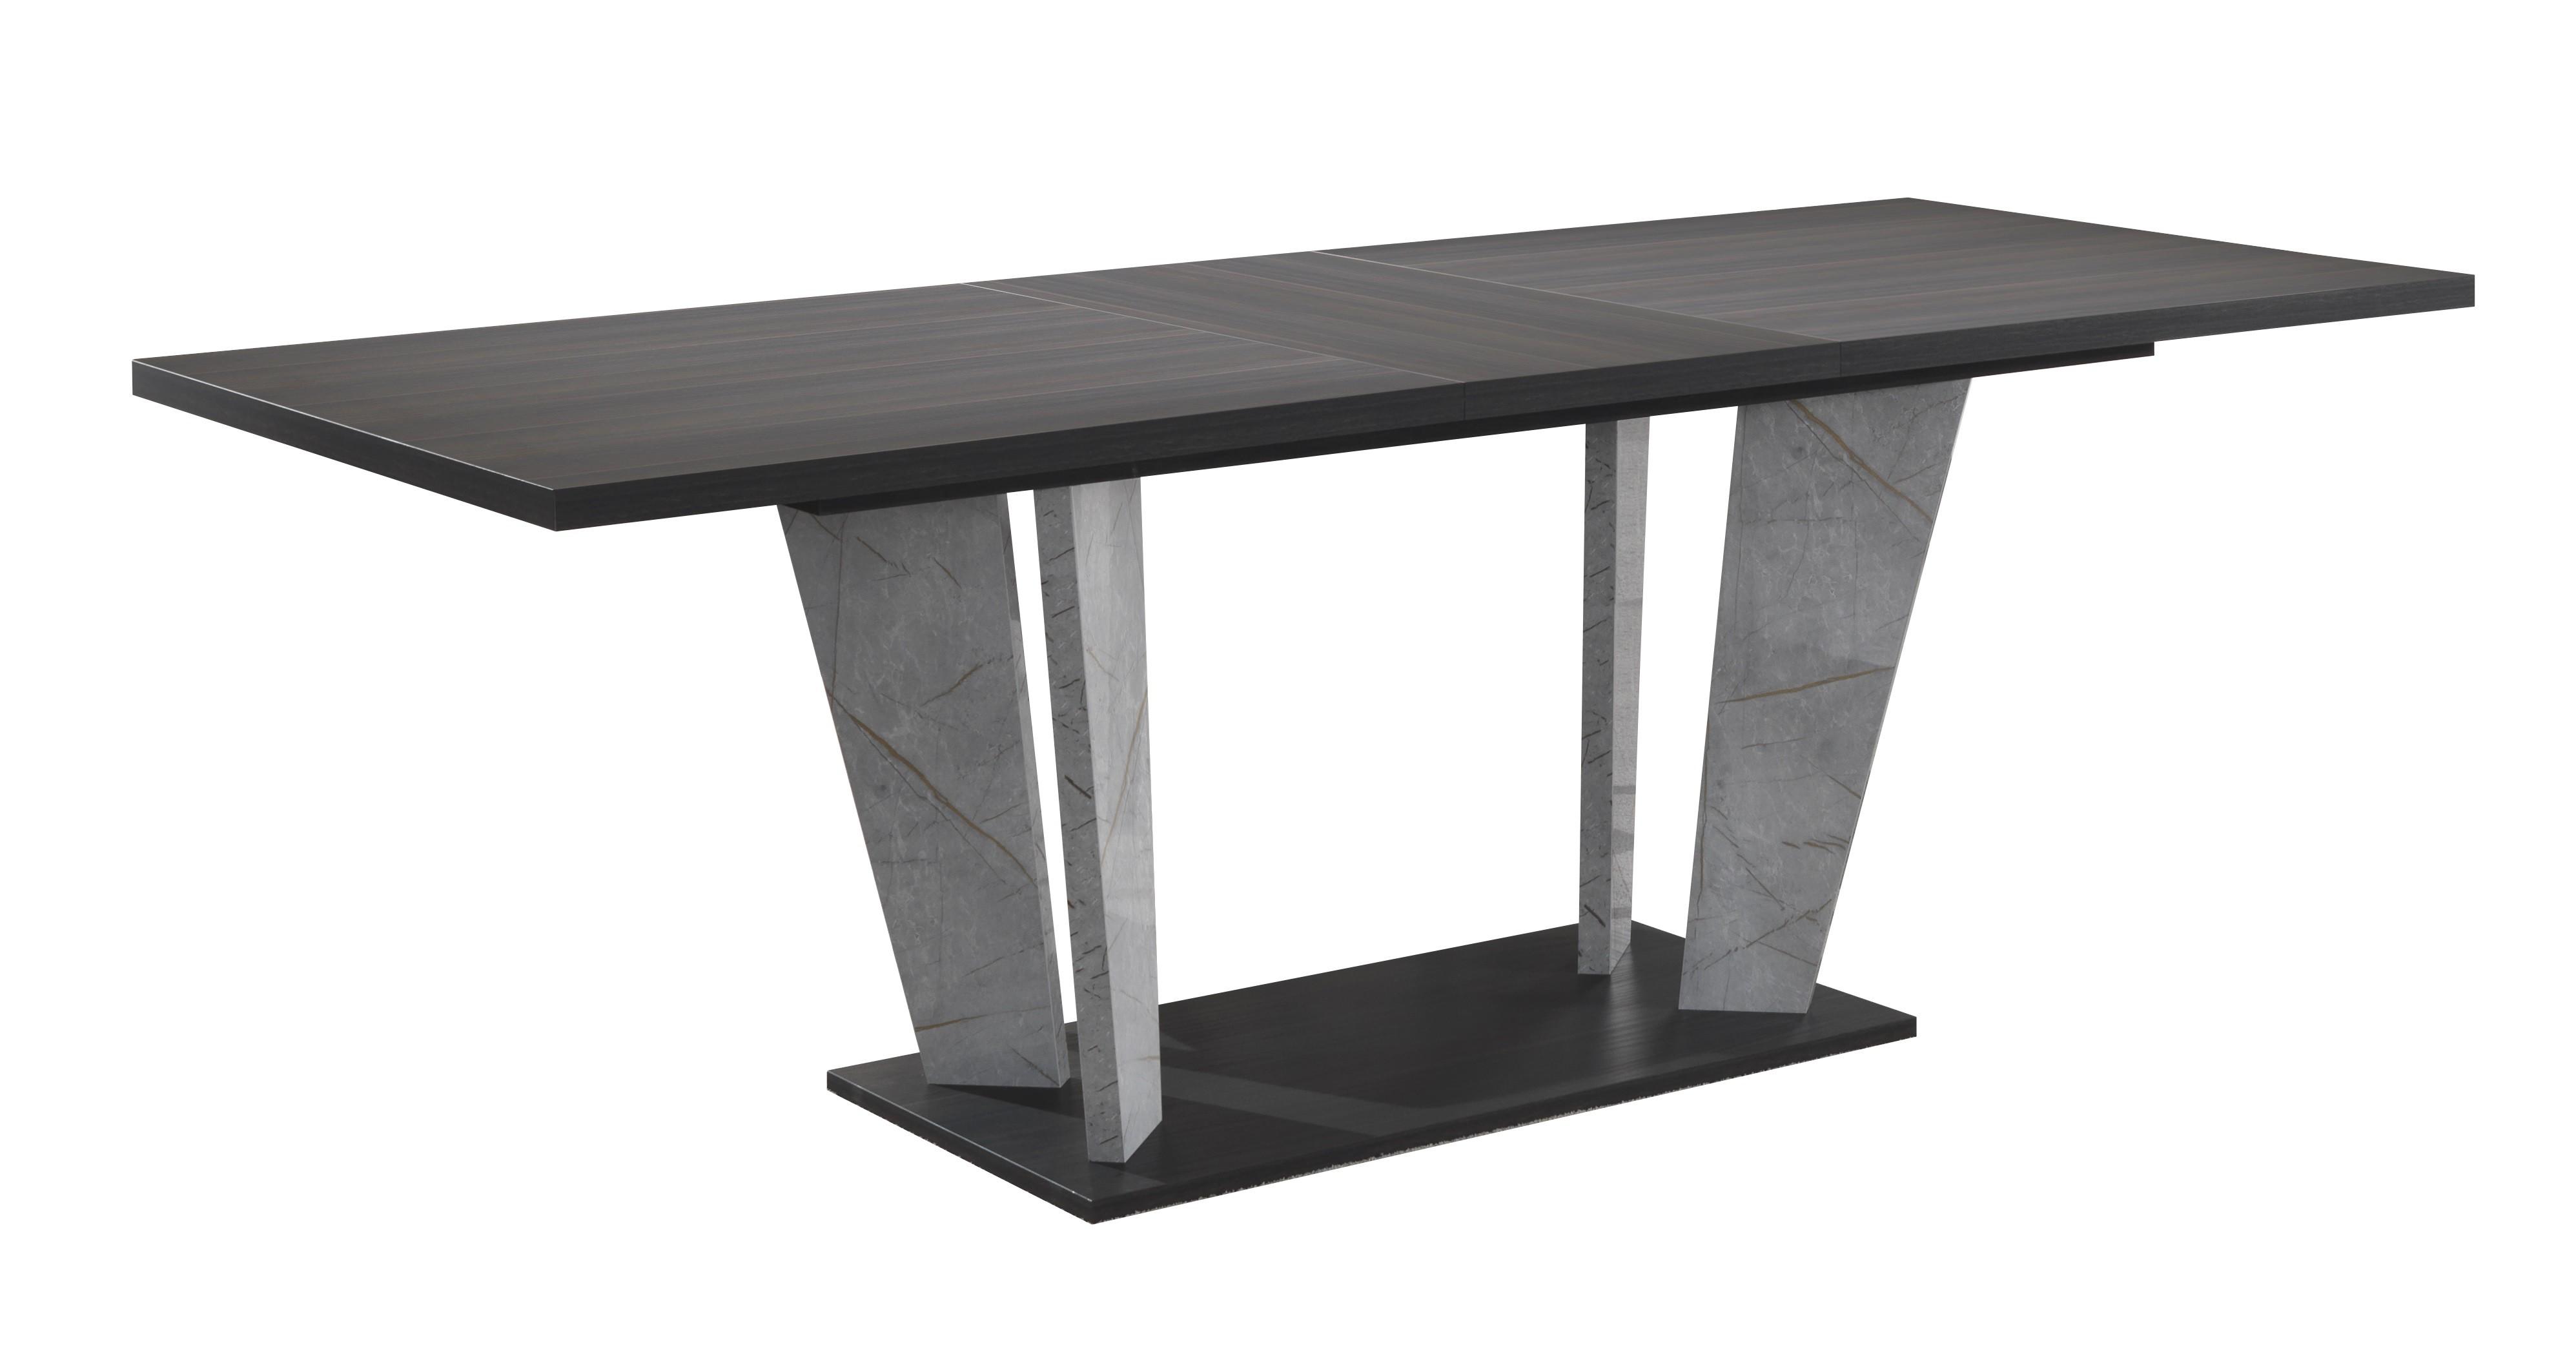 Contemporary, Modern Dining Table Travertine SKU18772-DT in Wenge, Gray 